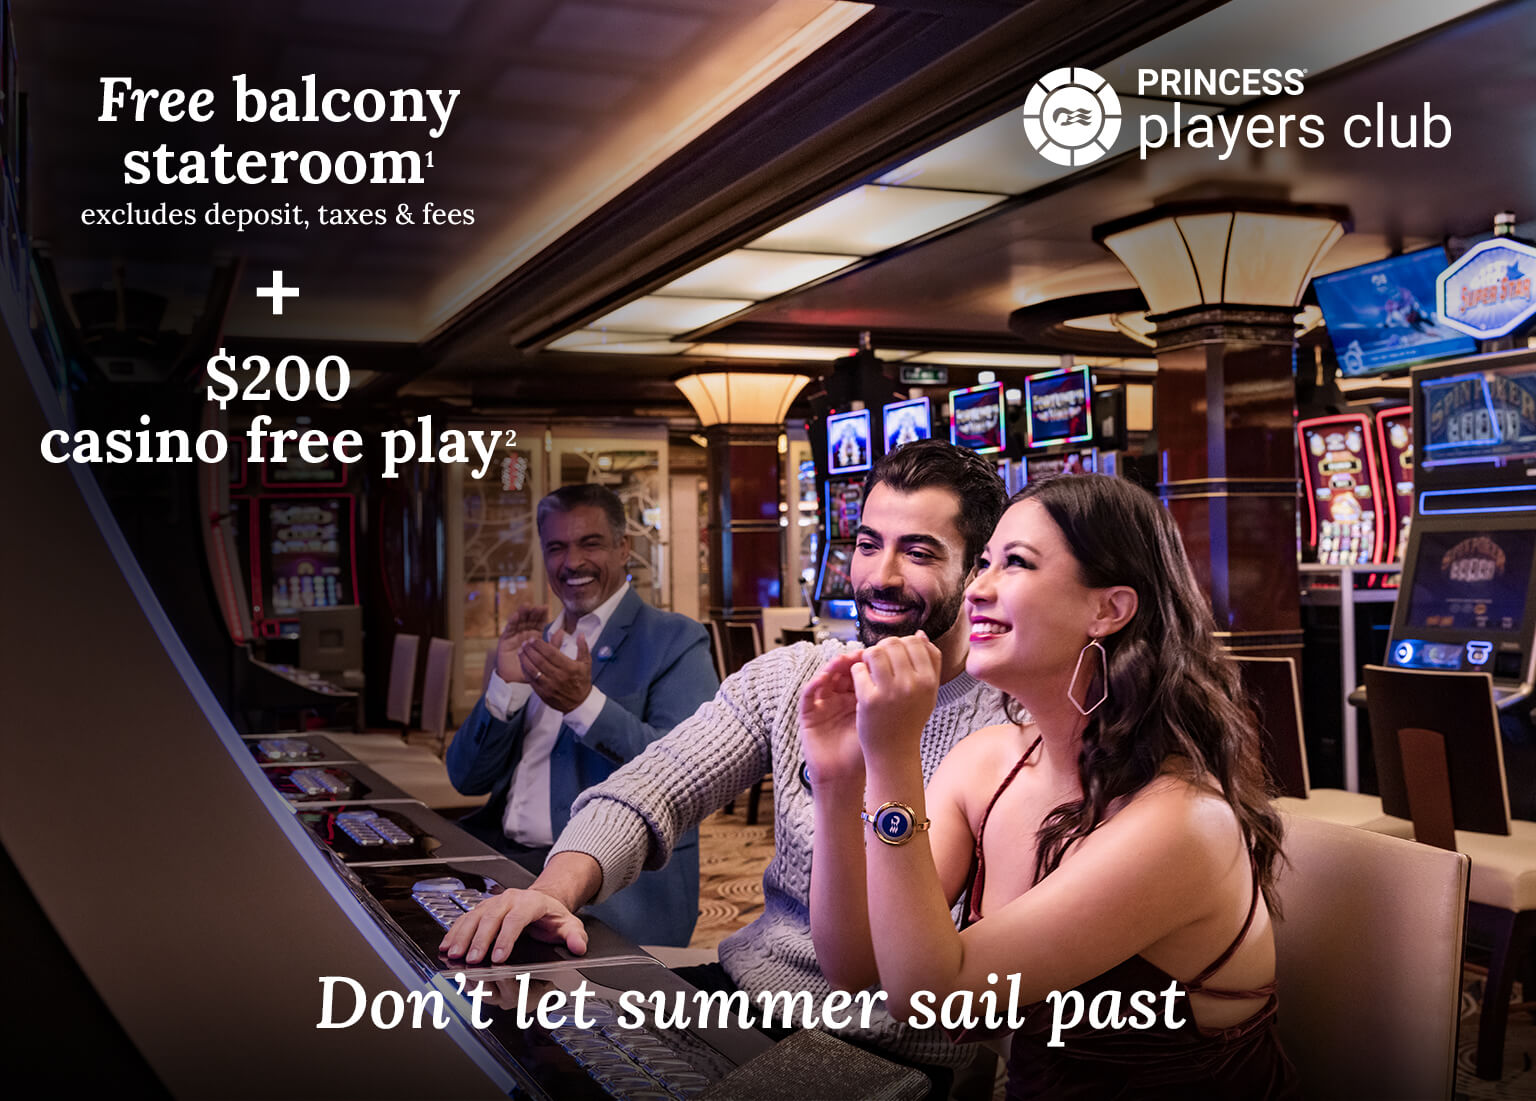 Free balcony stateroom + $200 casino free play. Click here to book.